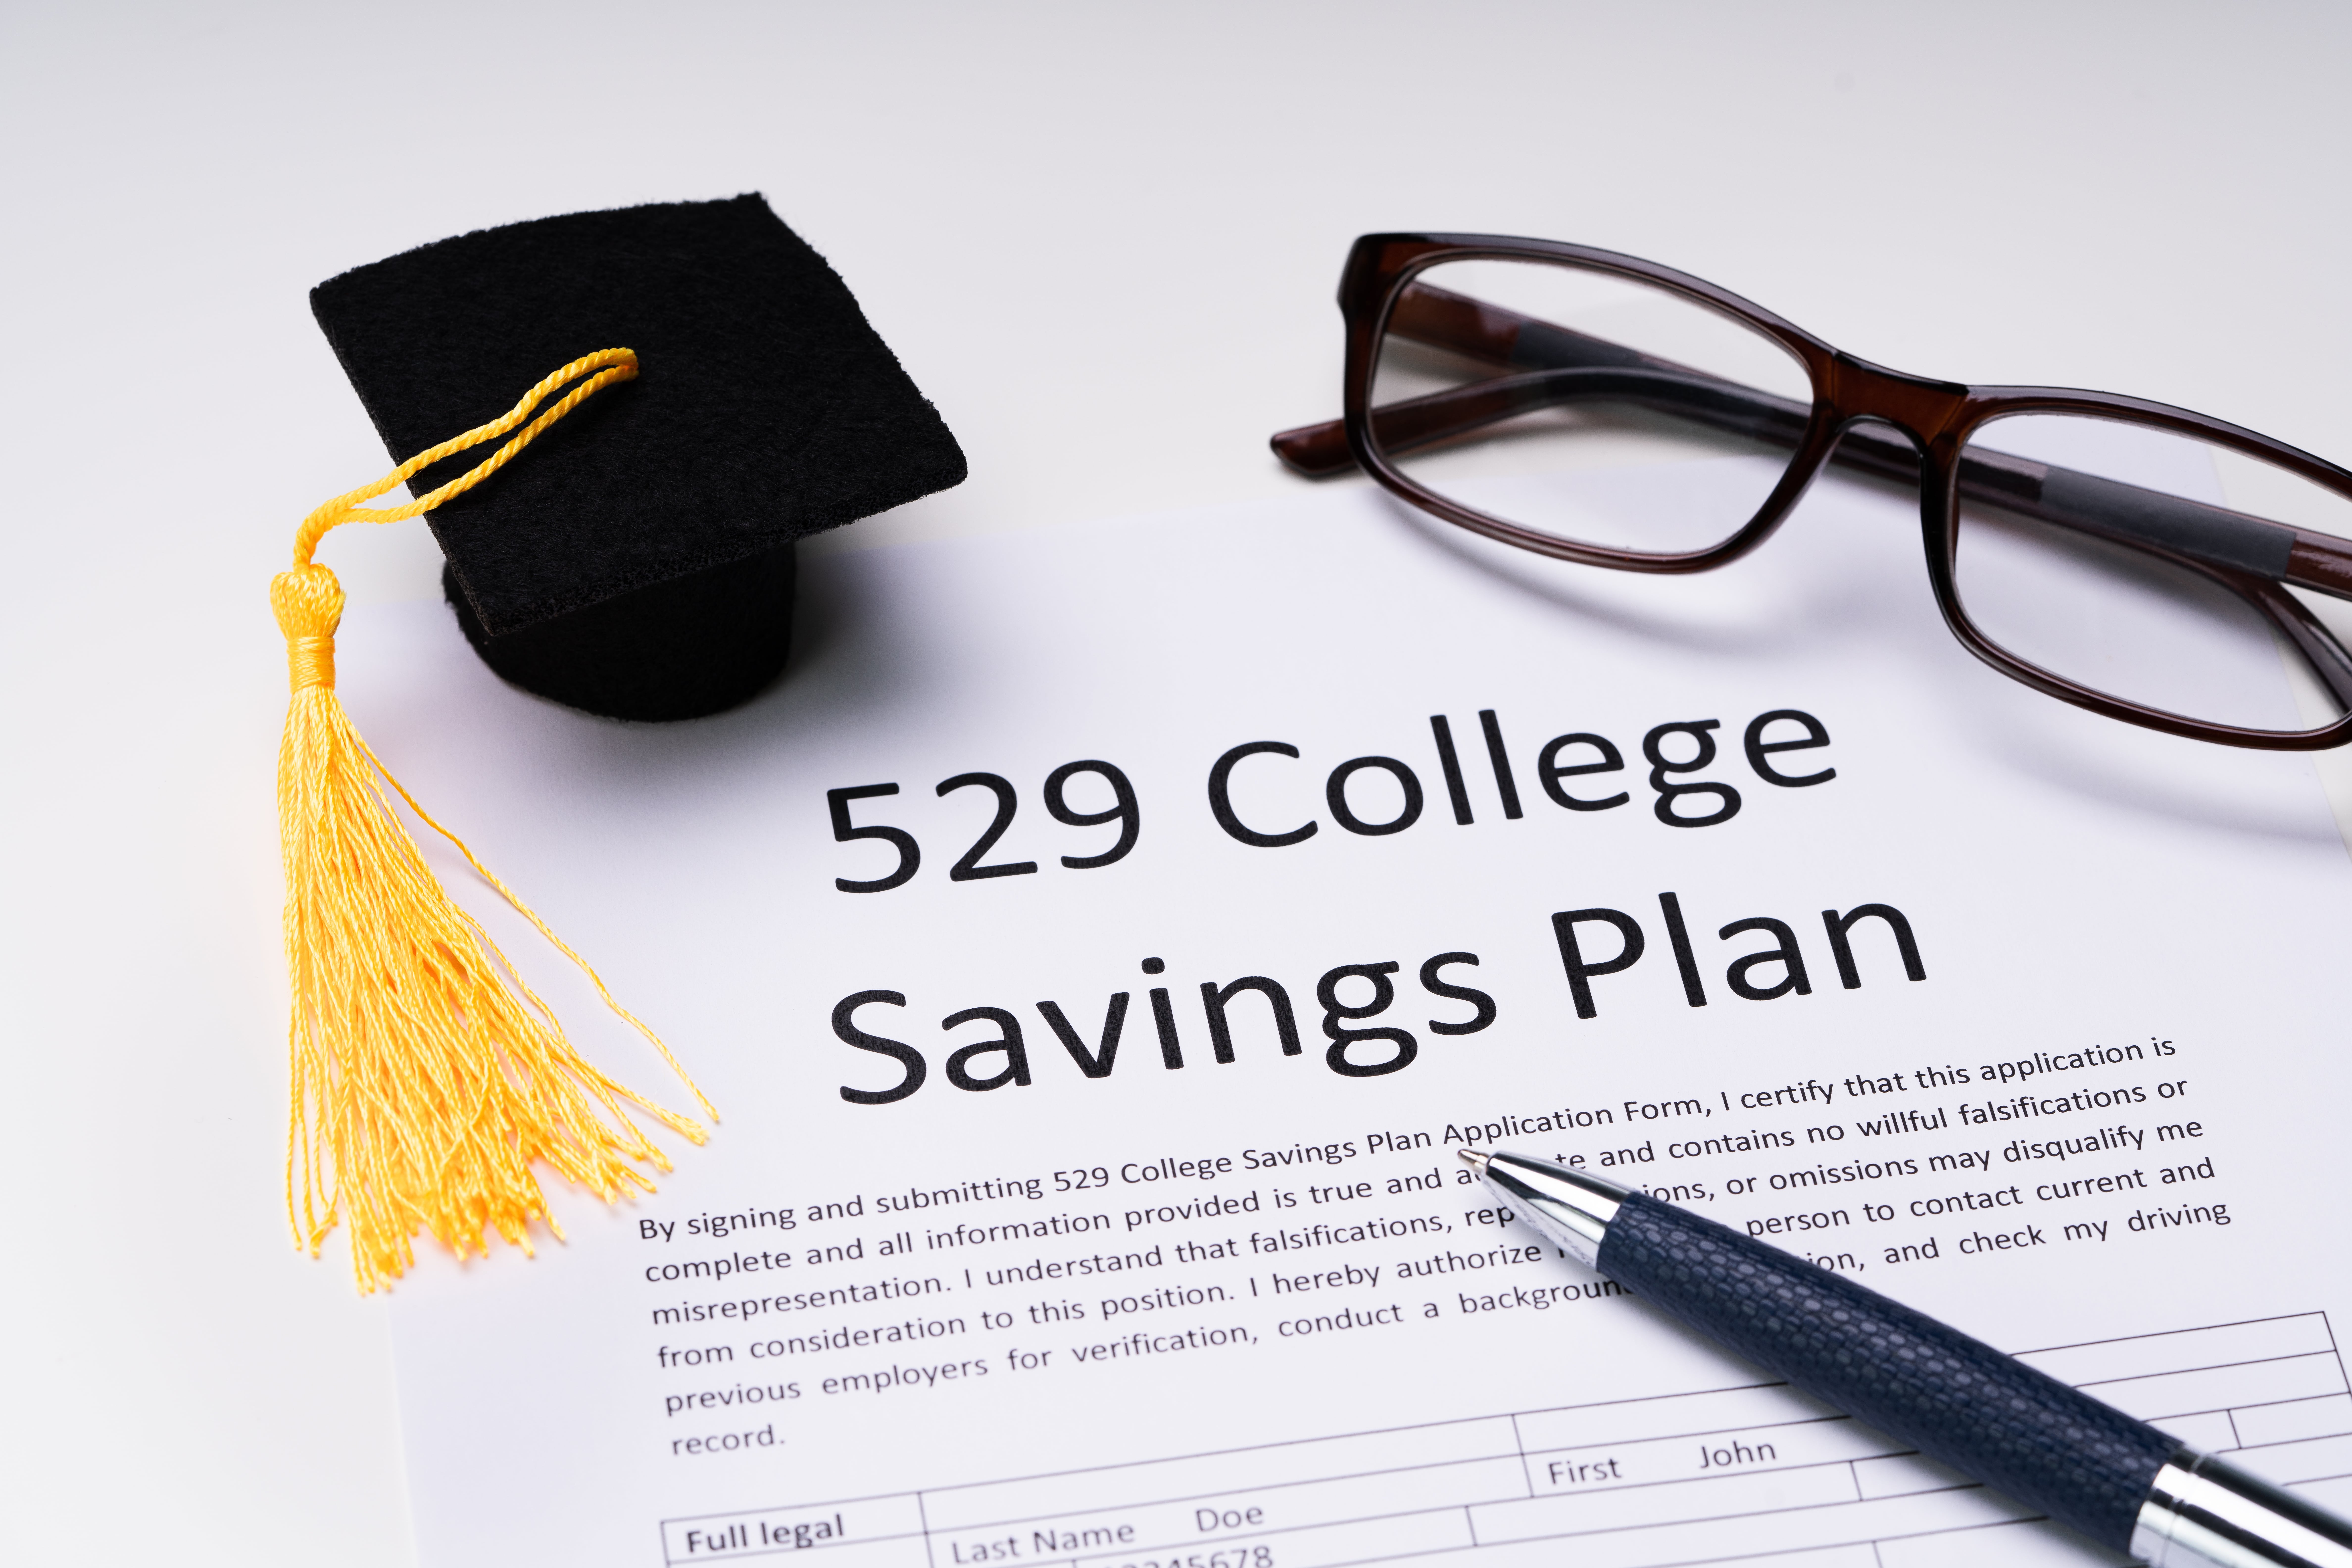 Your Questions Answered: Should I Open A 529 College Savings Plan for My Child?